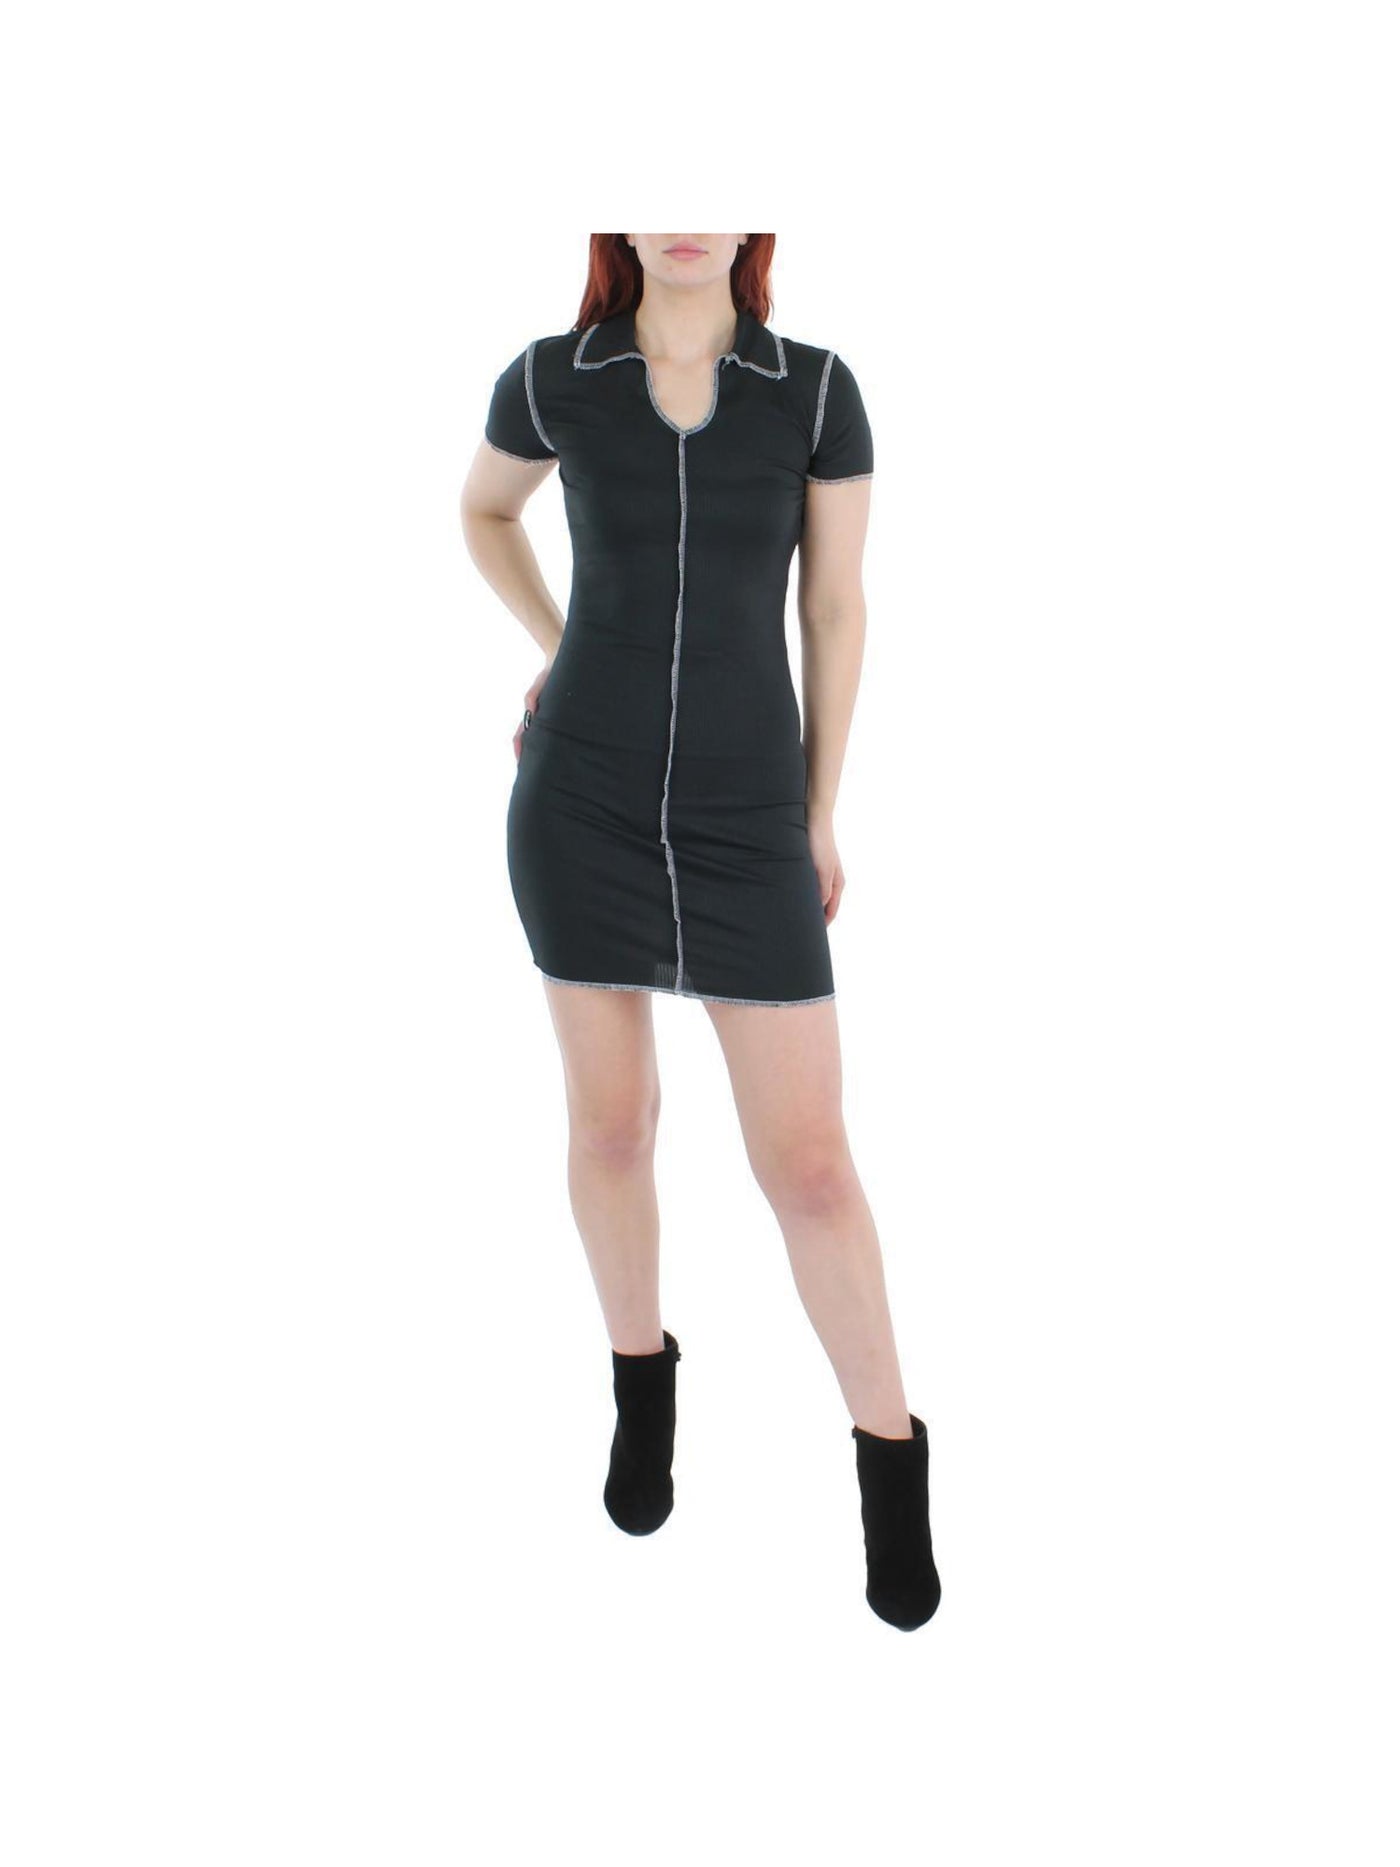 NO COMMENT Womens Black Ribbed Unlined Pullover Short Sleeve Collared Short Body Con Dress Juniors S